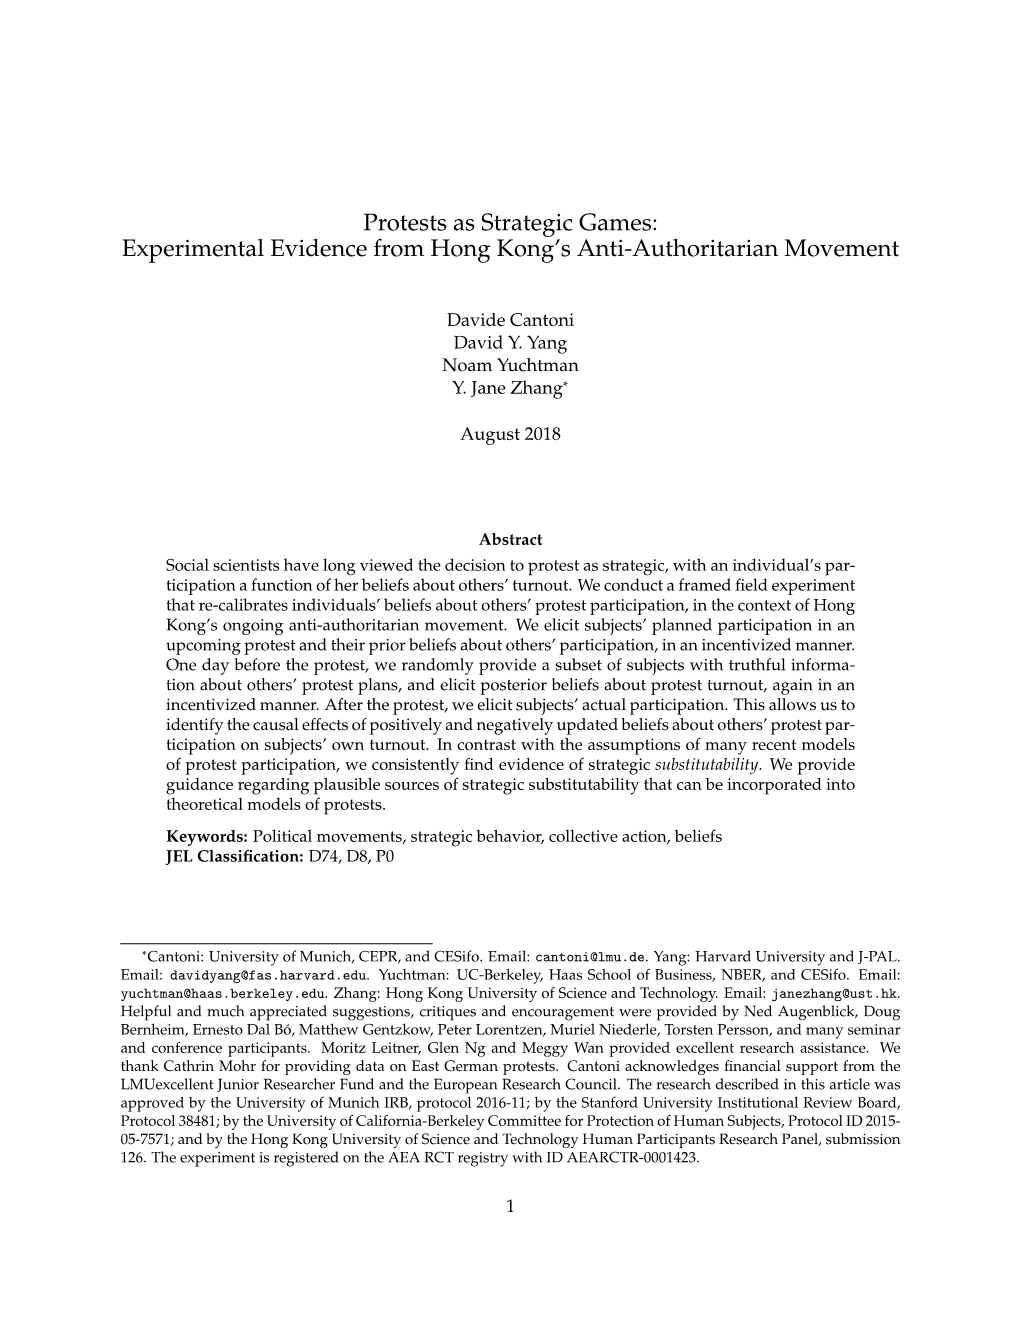 Experimental Evidence from Hong Kong's Anti-Authoritarian Movement